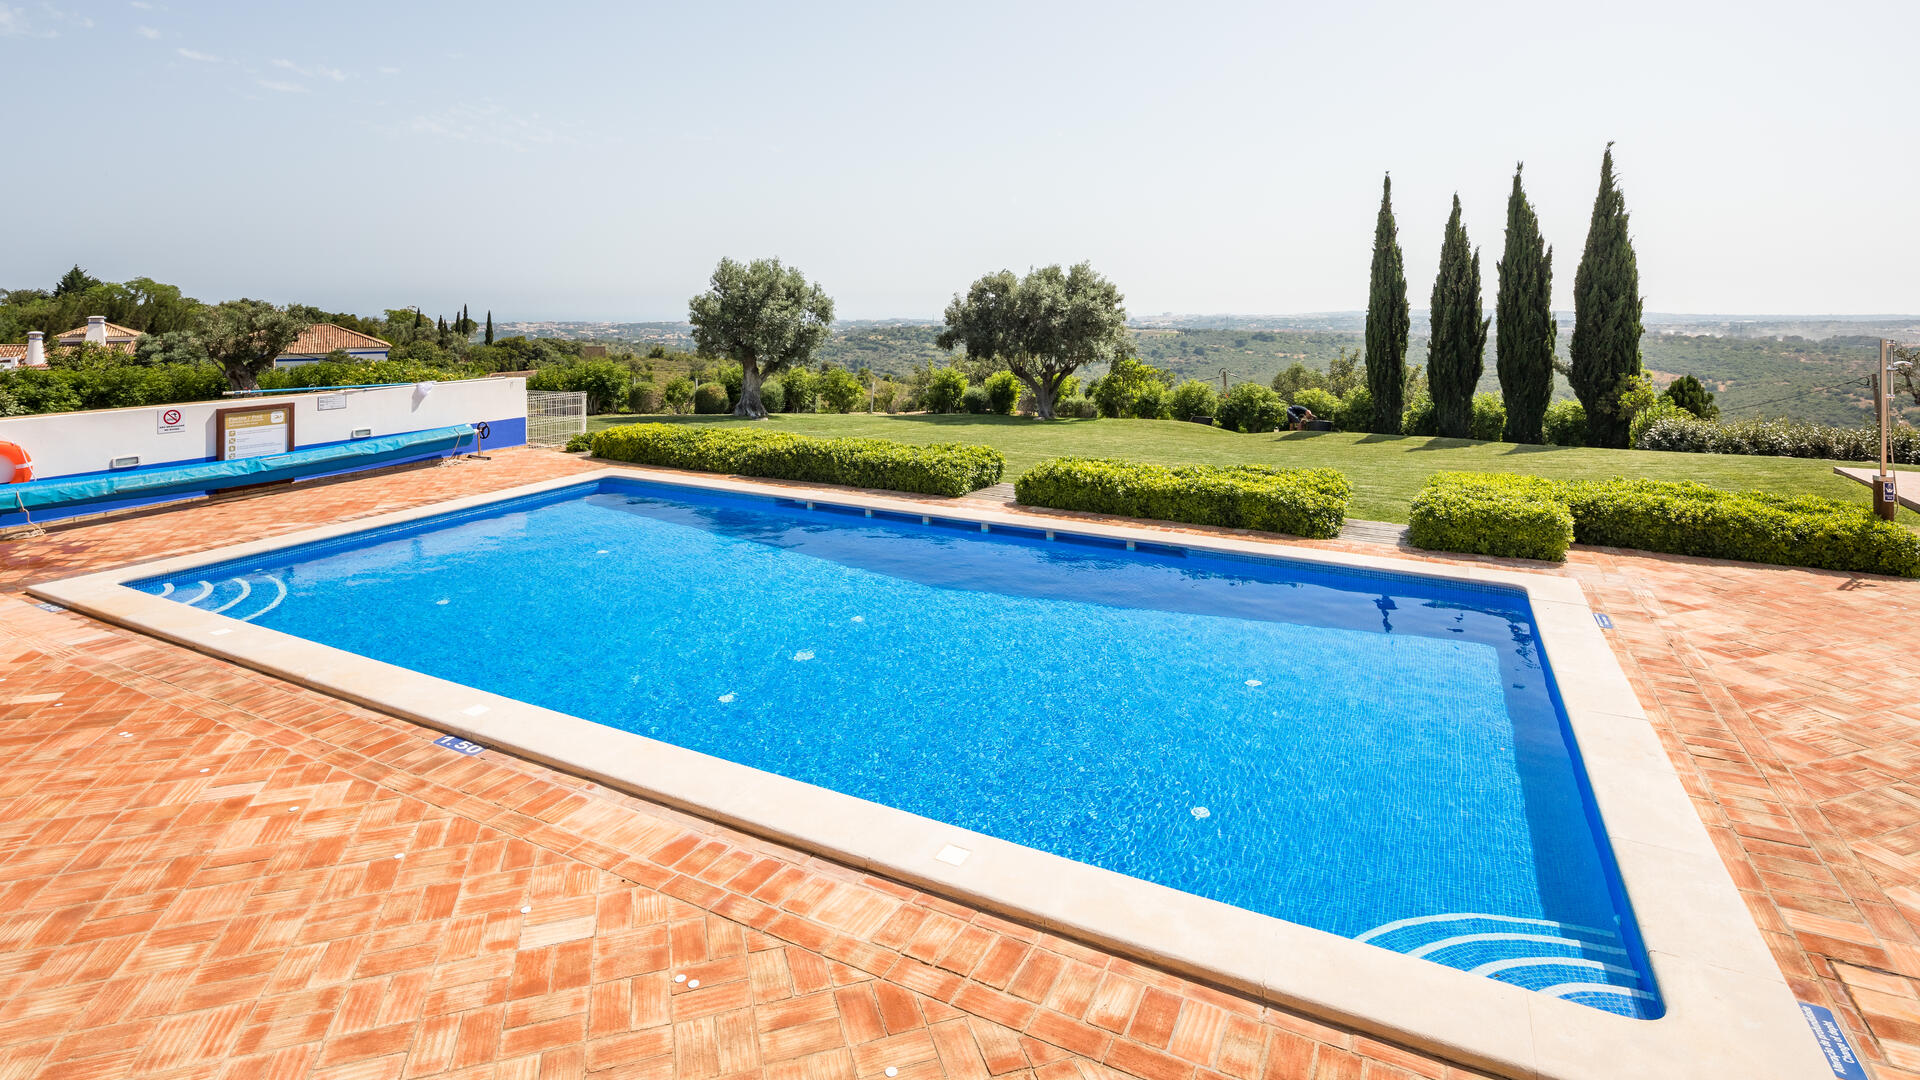 7 bedroom child friendly villa in Portugal perfect for holidays